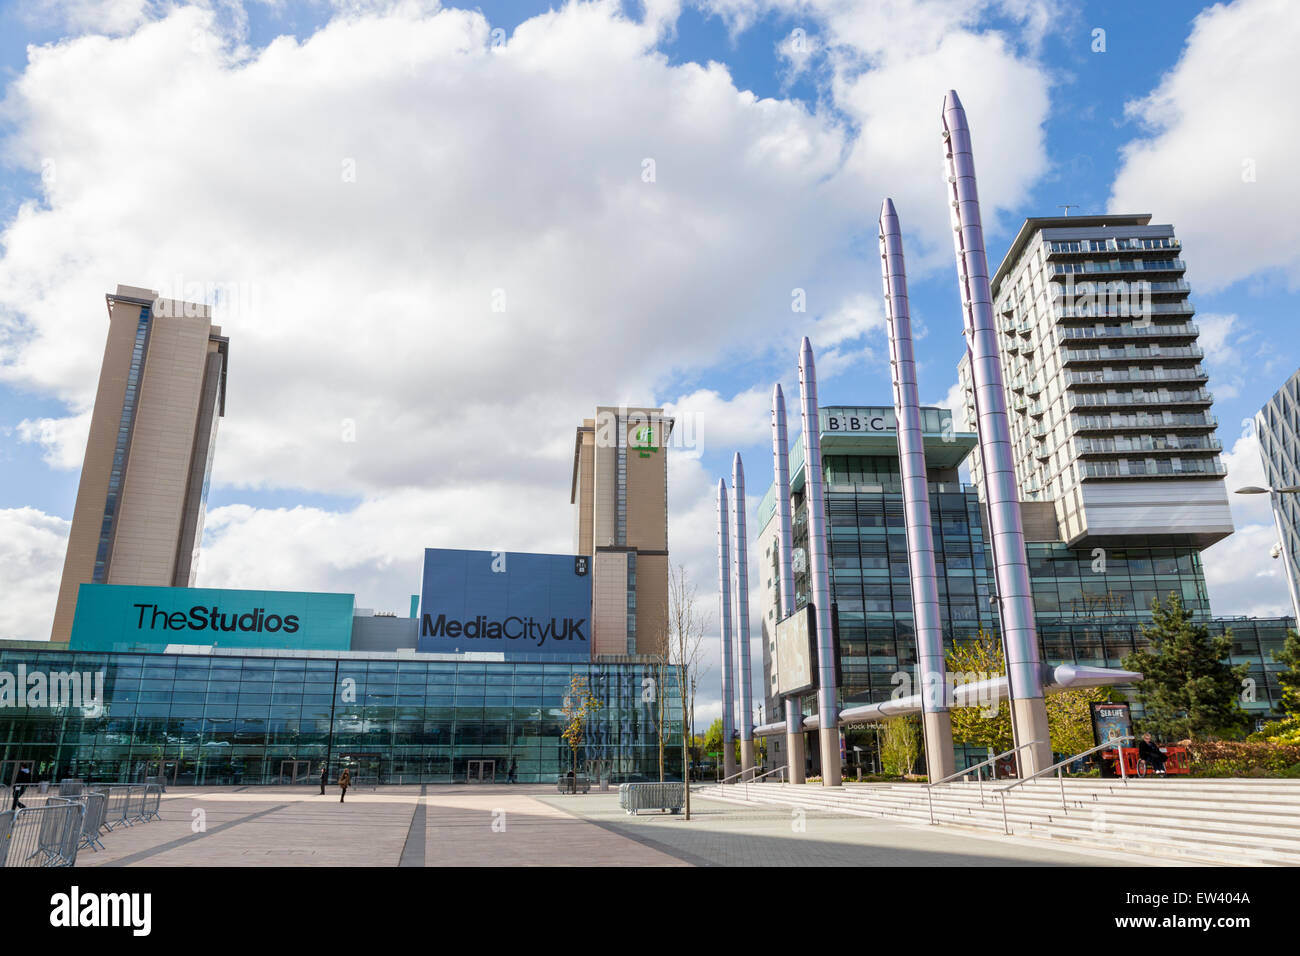 MediaCityUK, Salford Quays, Manchester, Angleterre, RU Banque D'Images